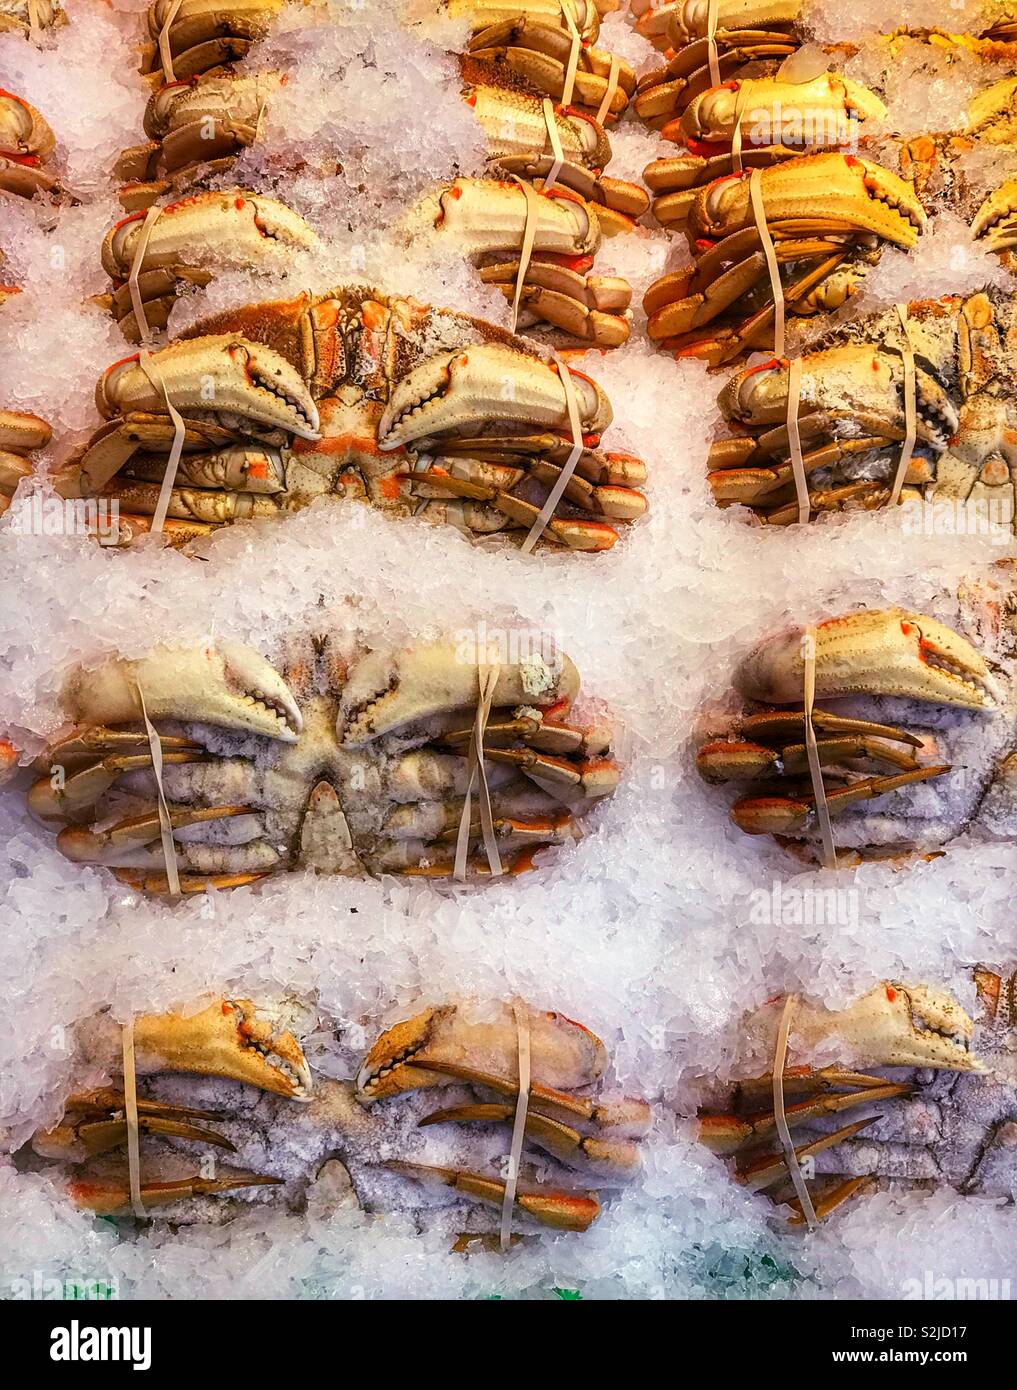 Crabs for sale at a public market. Pikes Place market in Seattle Washington, Stock Photo